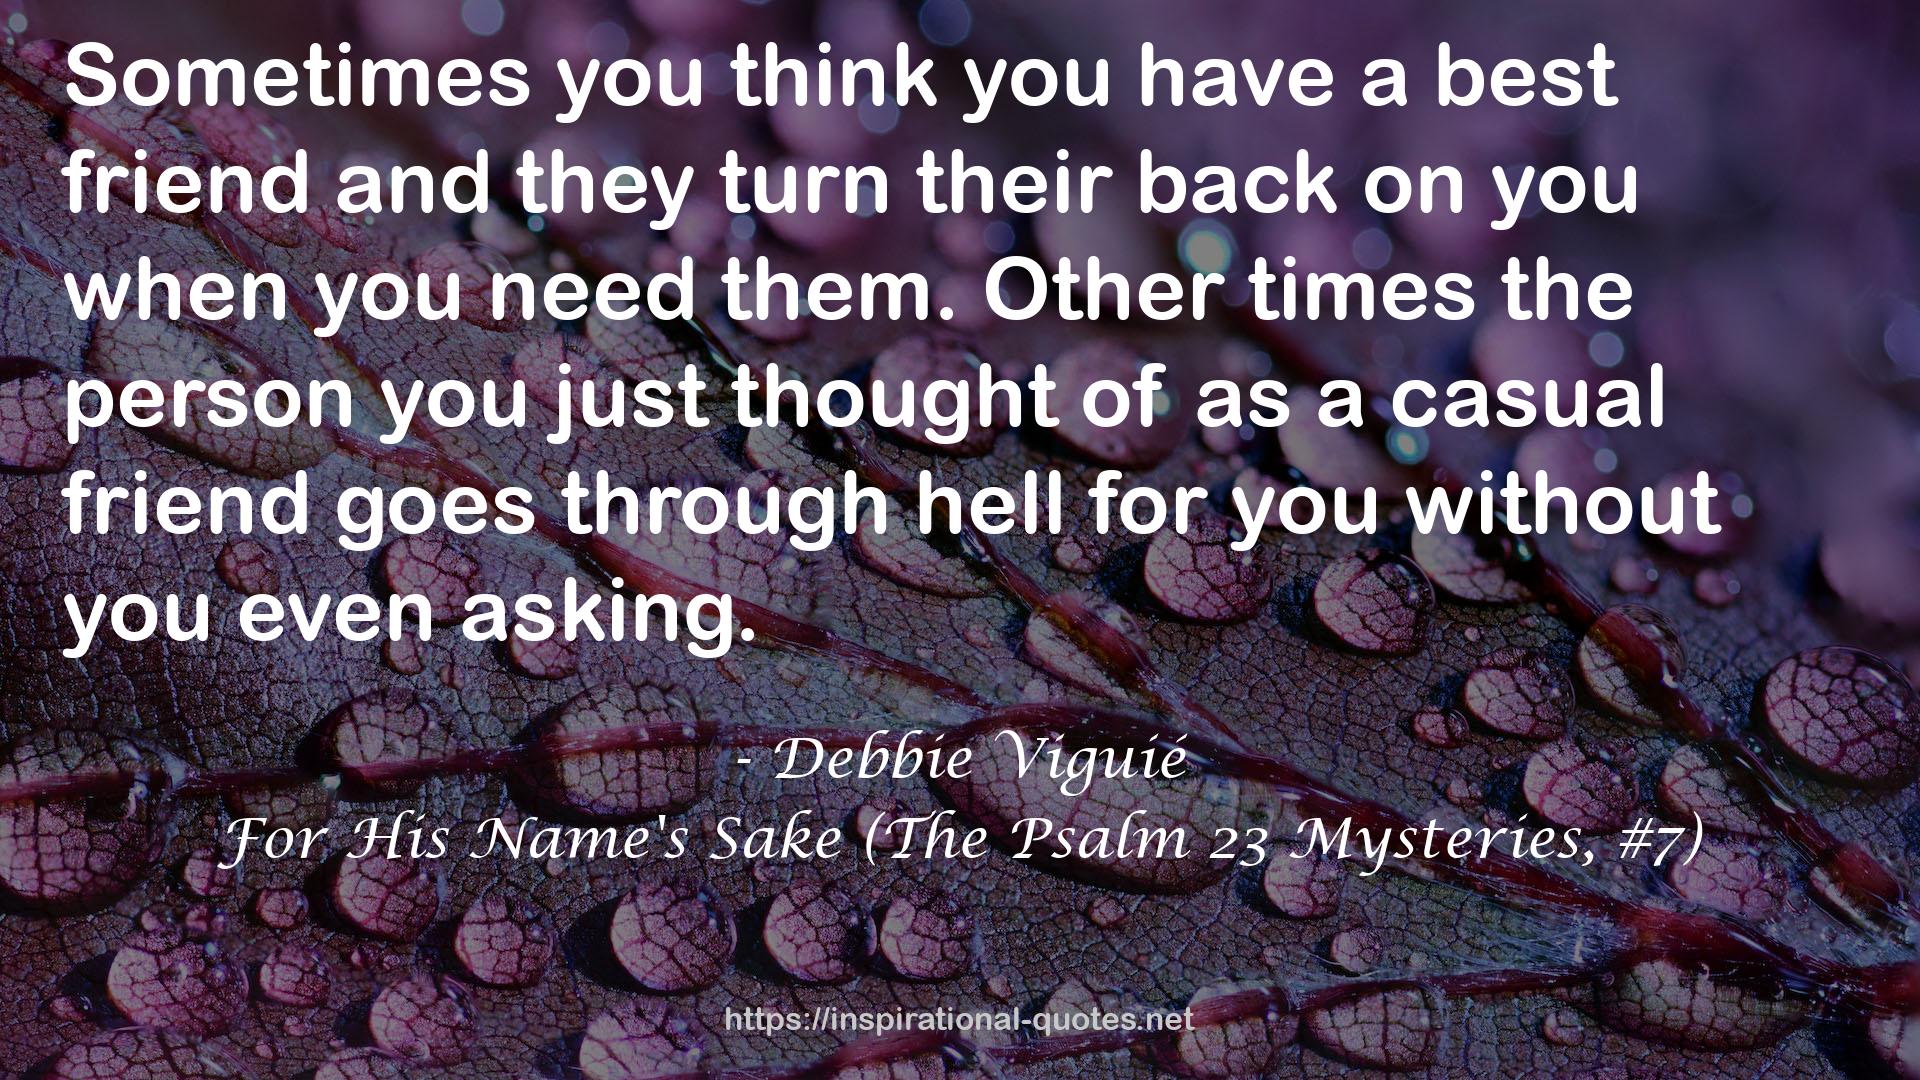 For His Name's Sake (The Psalm 23 Mysteries, #7) QUOTES